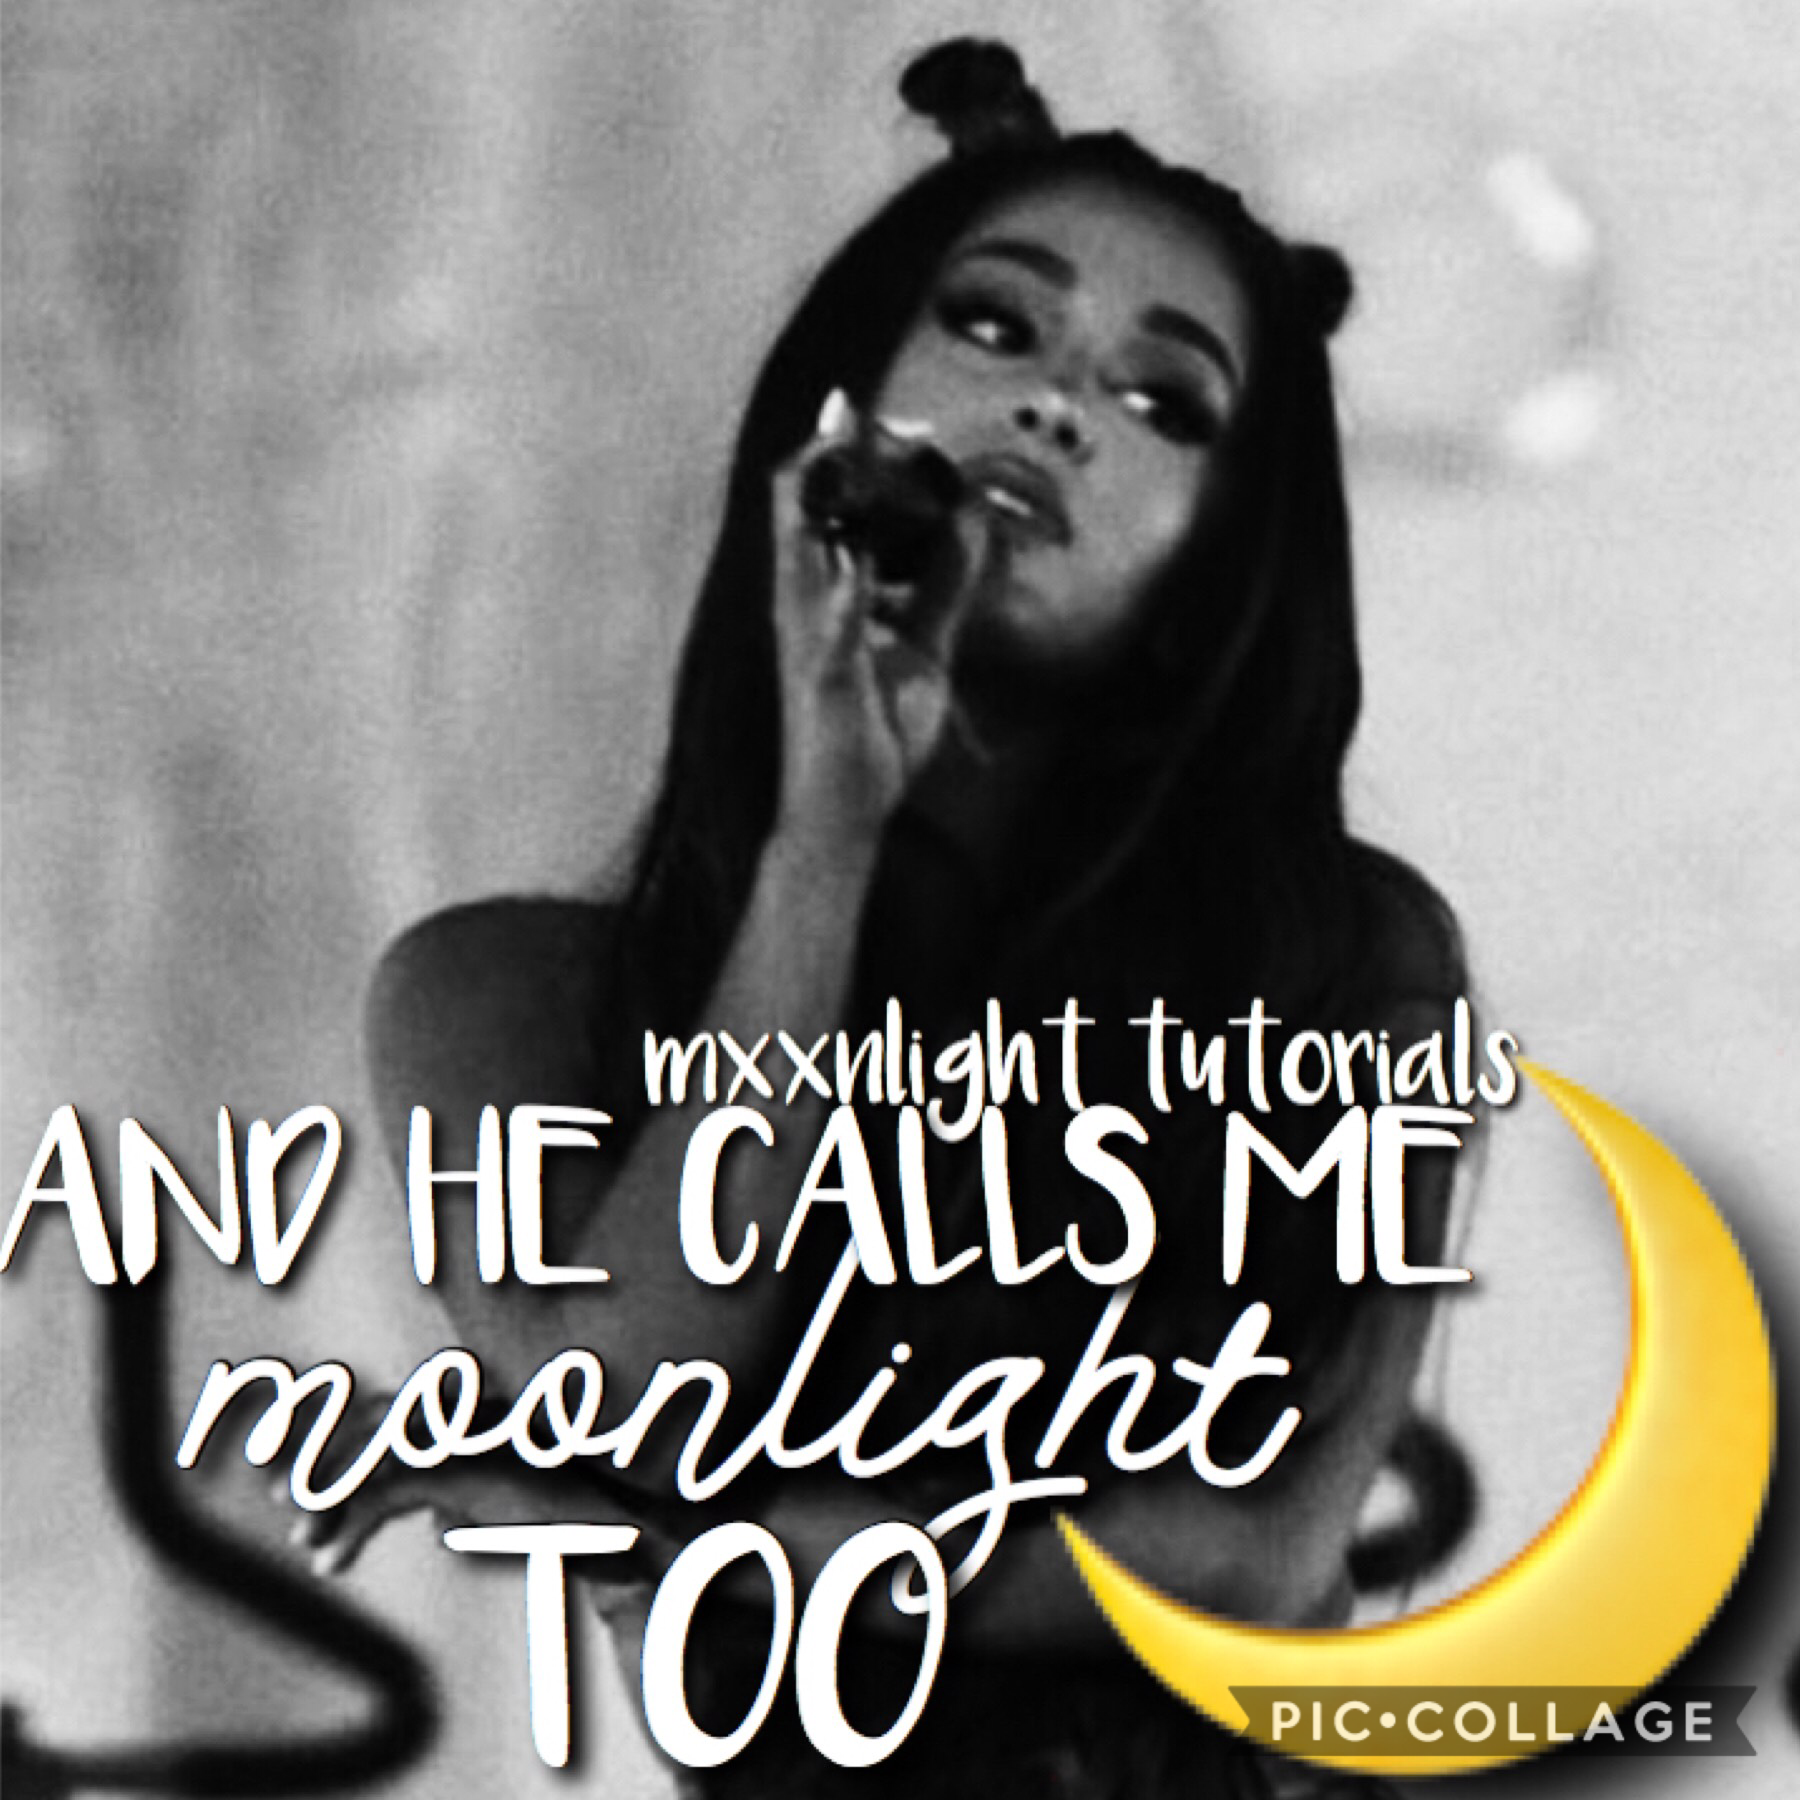 tap🌙🌙🌙🌙




Hi welcome to my account up I’ve Ariana grande and black and white collages please follow me💞 
   🌙mxxnlight tutorials 